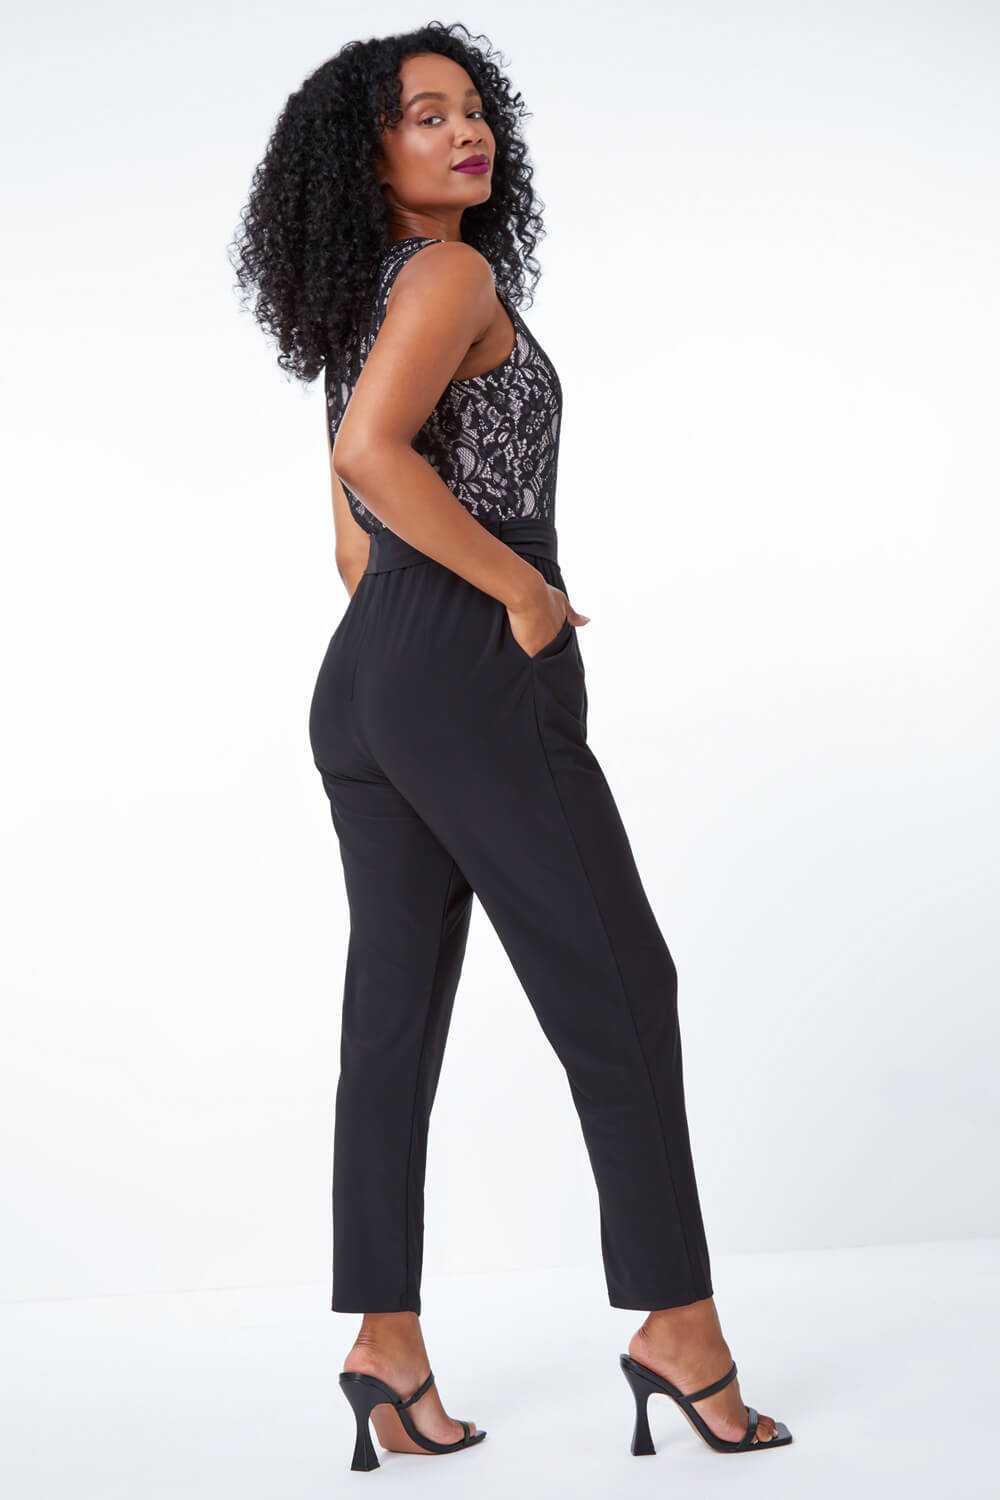 Black Petite Lace Belted Stretch Jumpsuit, Image 3 of 5